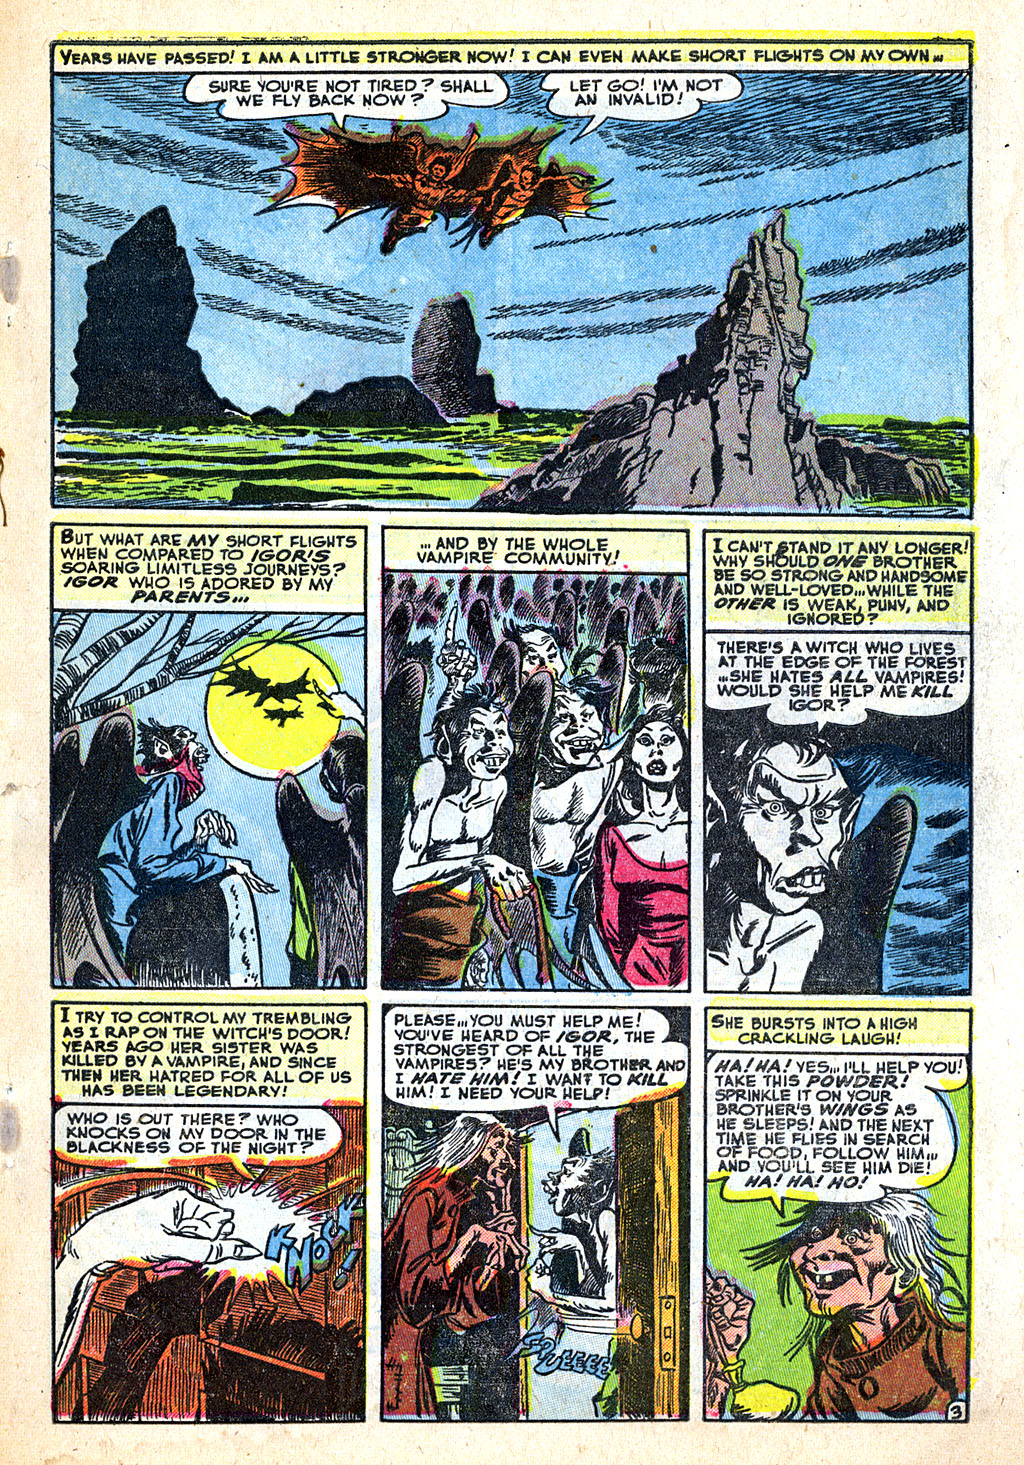 Marvel Tales (1949) 127 Page 4